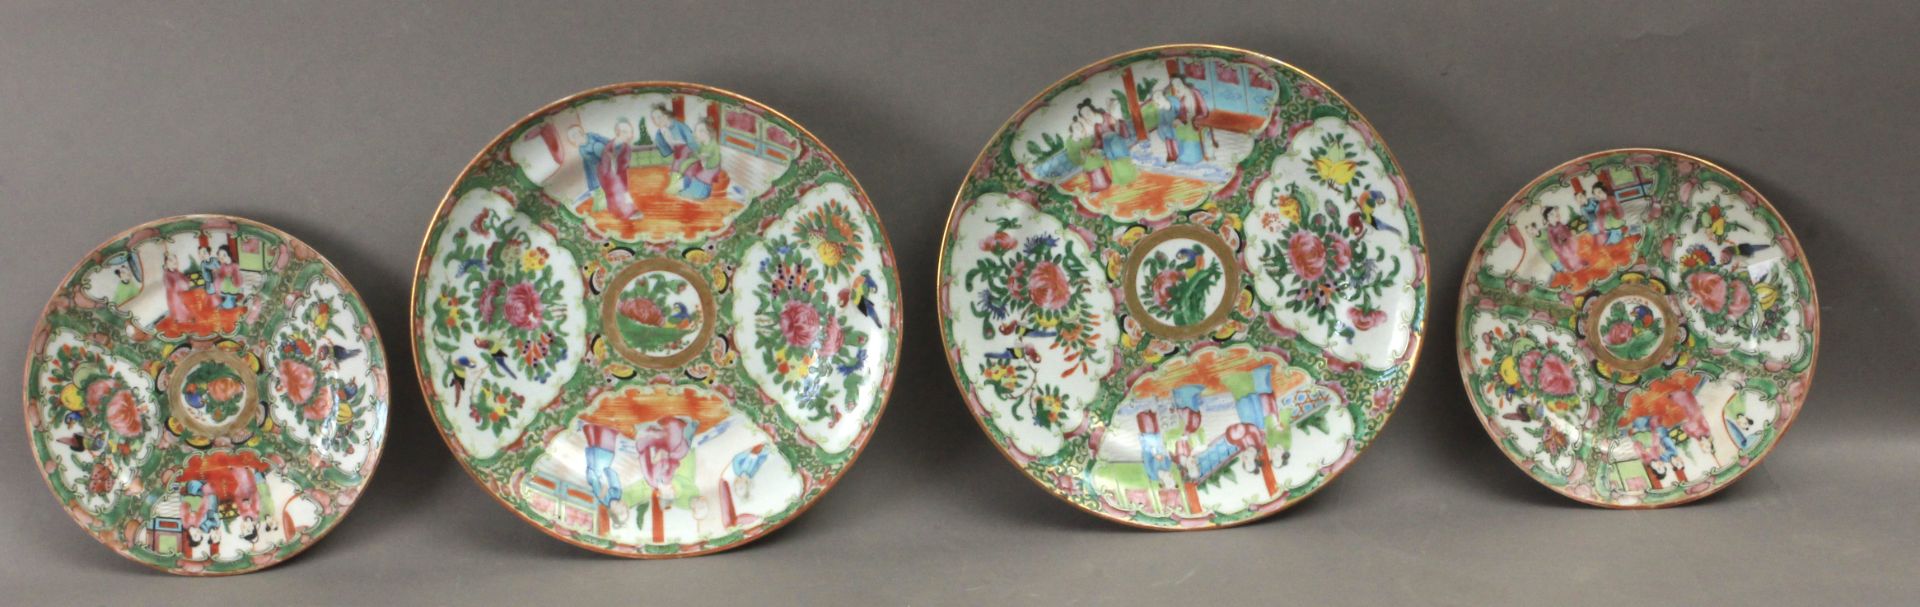 A set of four Canton Famille Rose porcelain plates, late 19th century-early 20th century